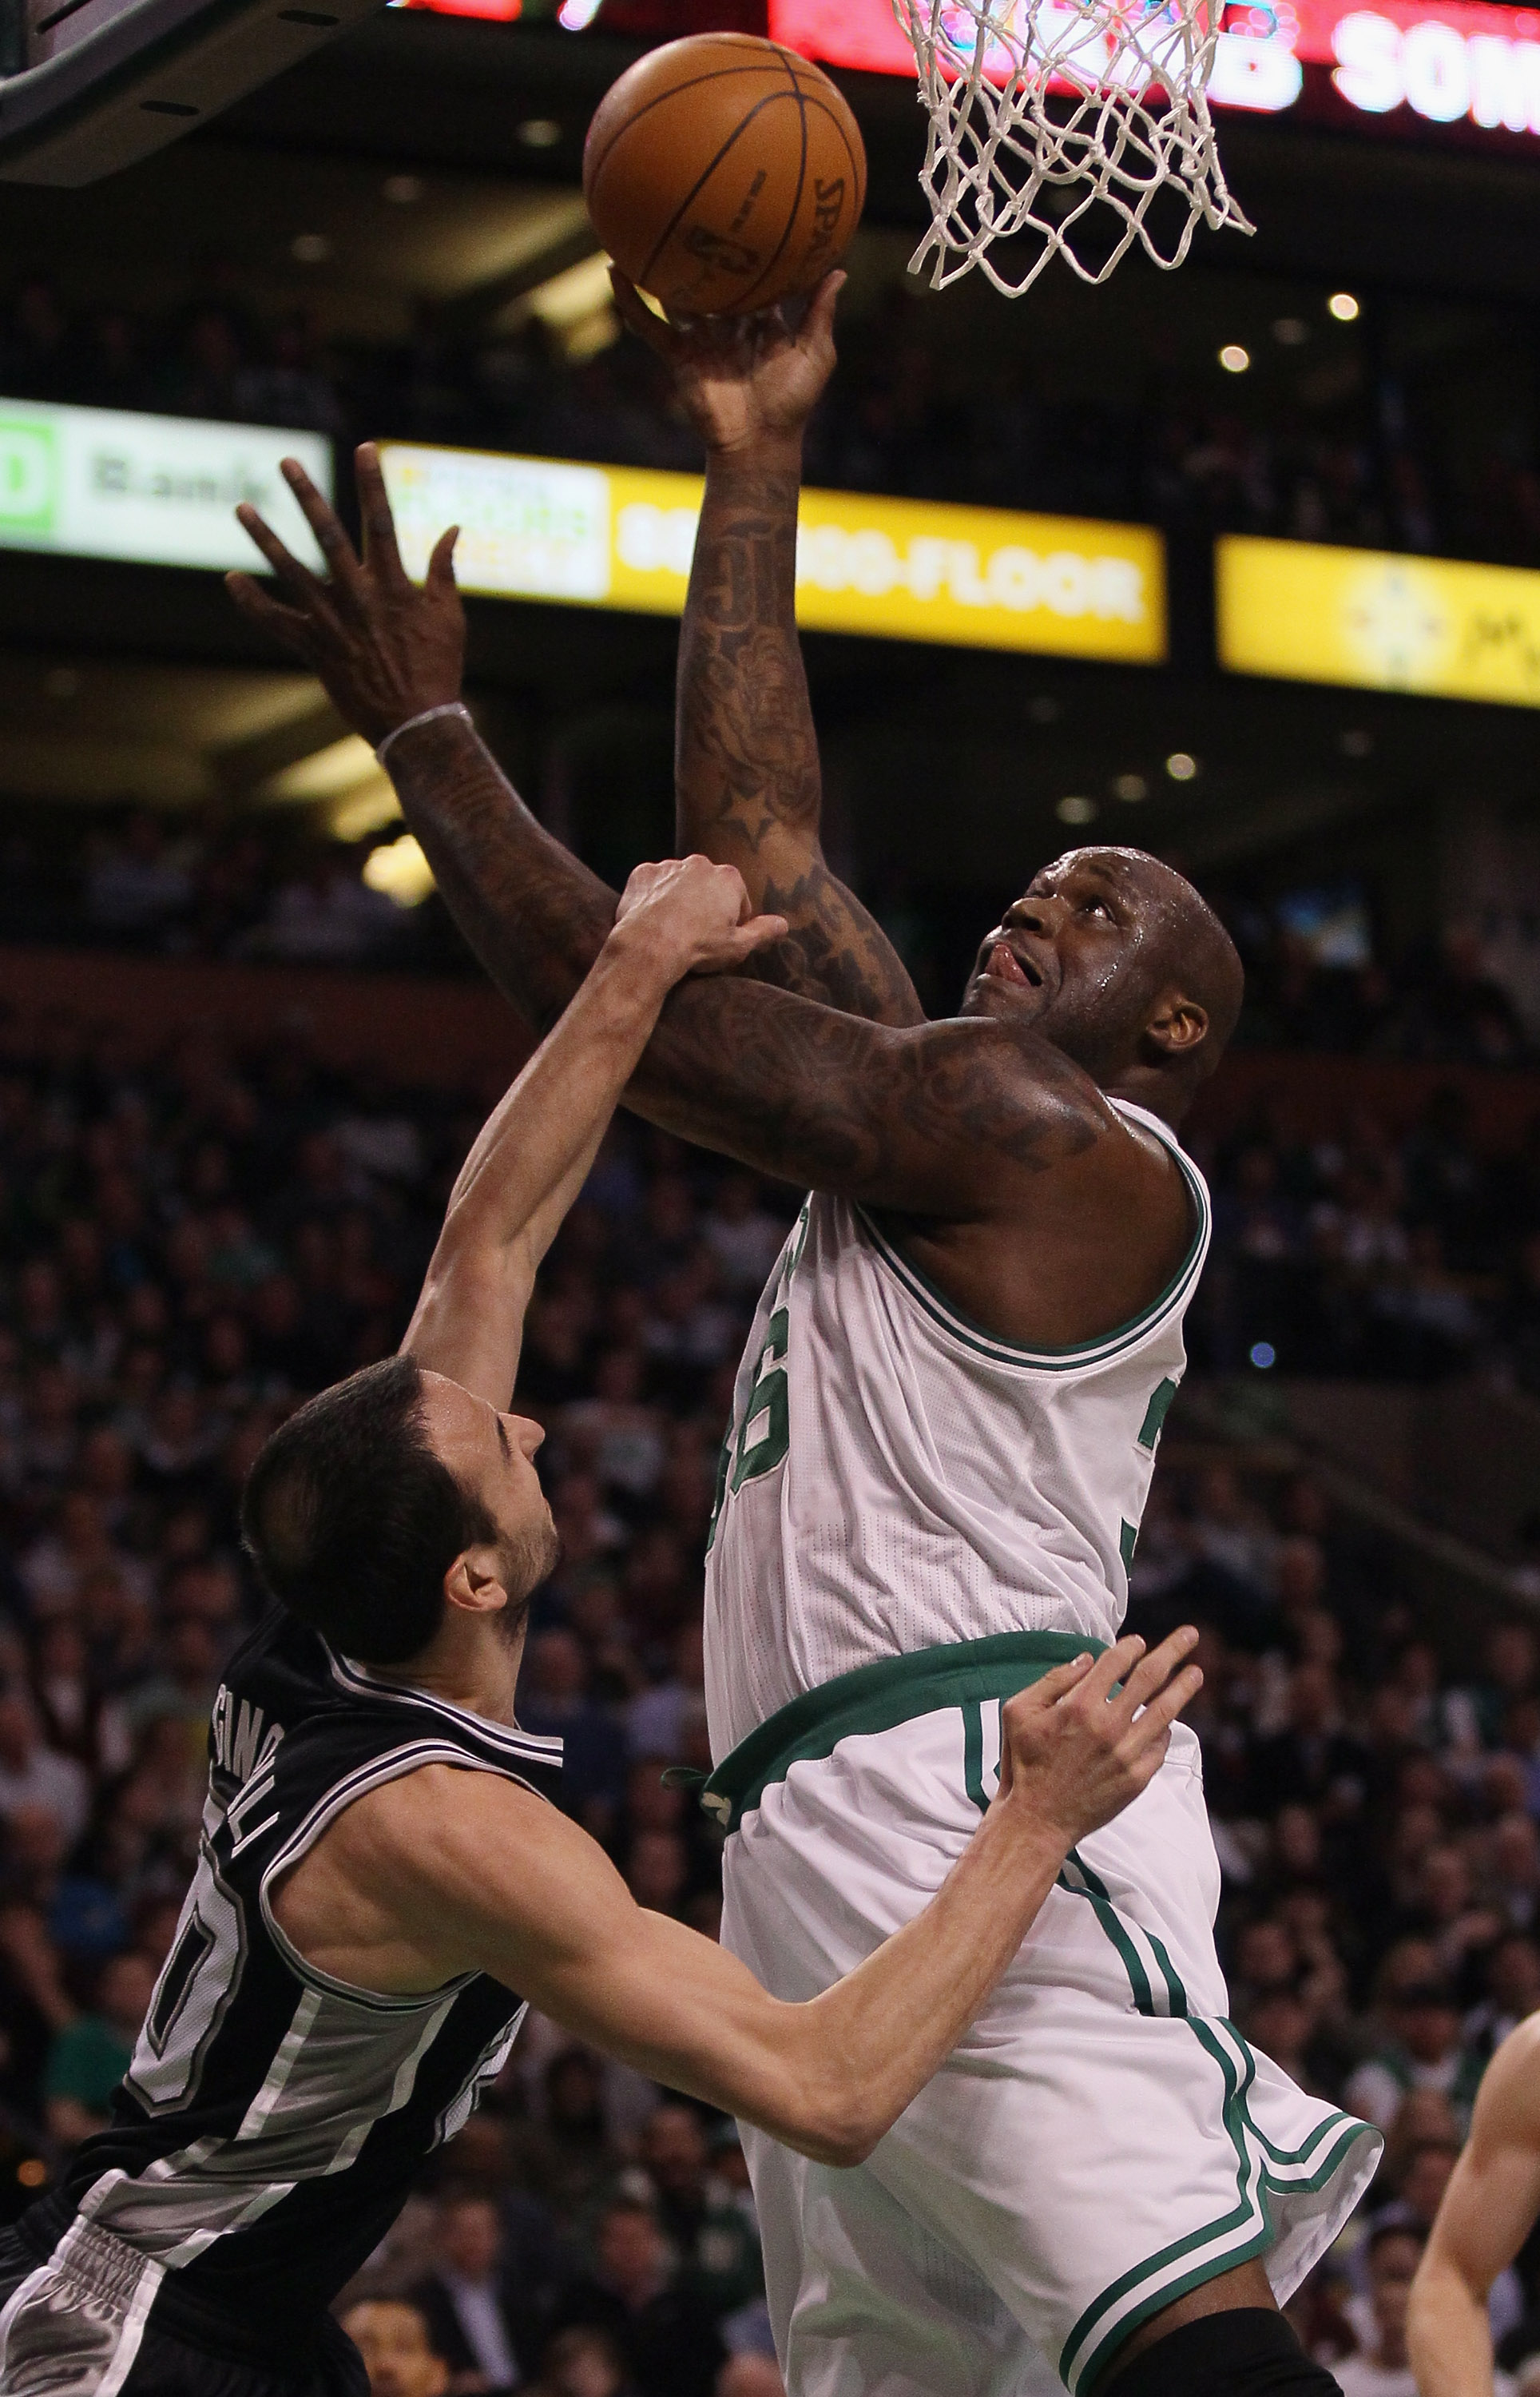 BOSTON, MA - JANUARY 05:  Shaquille O'Neal #36 of the Boston Celtics is fouled by Manu Ginobili #20 of the San Antonio Spurs on January 5, 2011 at the TD Garden in Boston, Massachusetts. NOTE TO USER: User expressly acknowledges and agrees that, by downlo